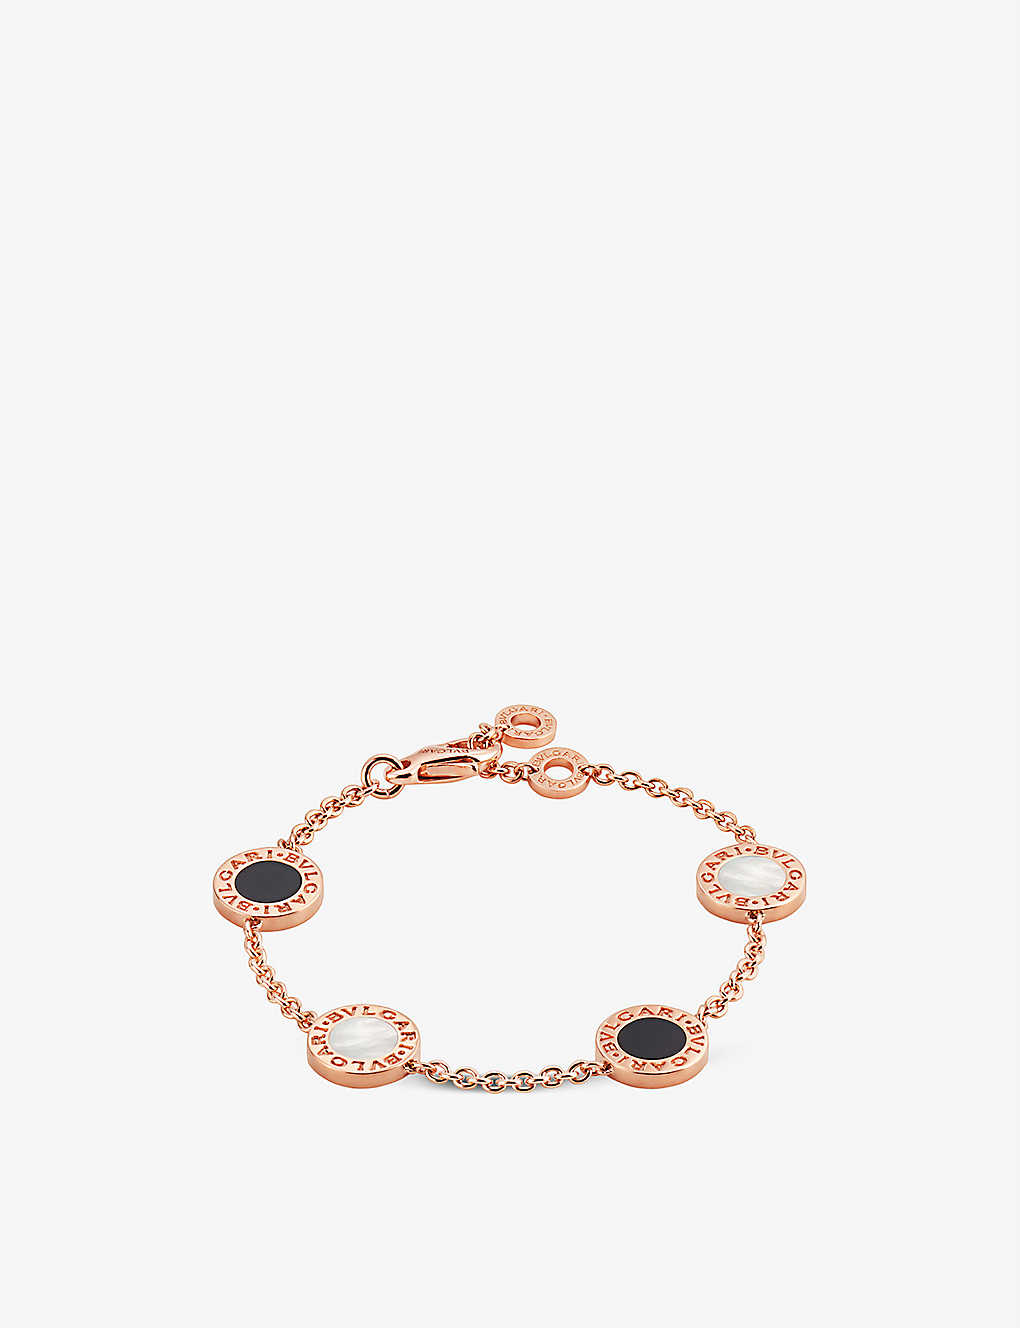 Bvlgari Womens Rose Gold 18ct Rose-gold, Mother Of Pearl And Onyx Bracelet